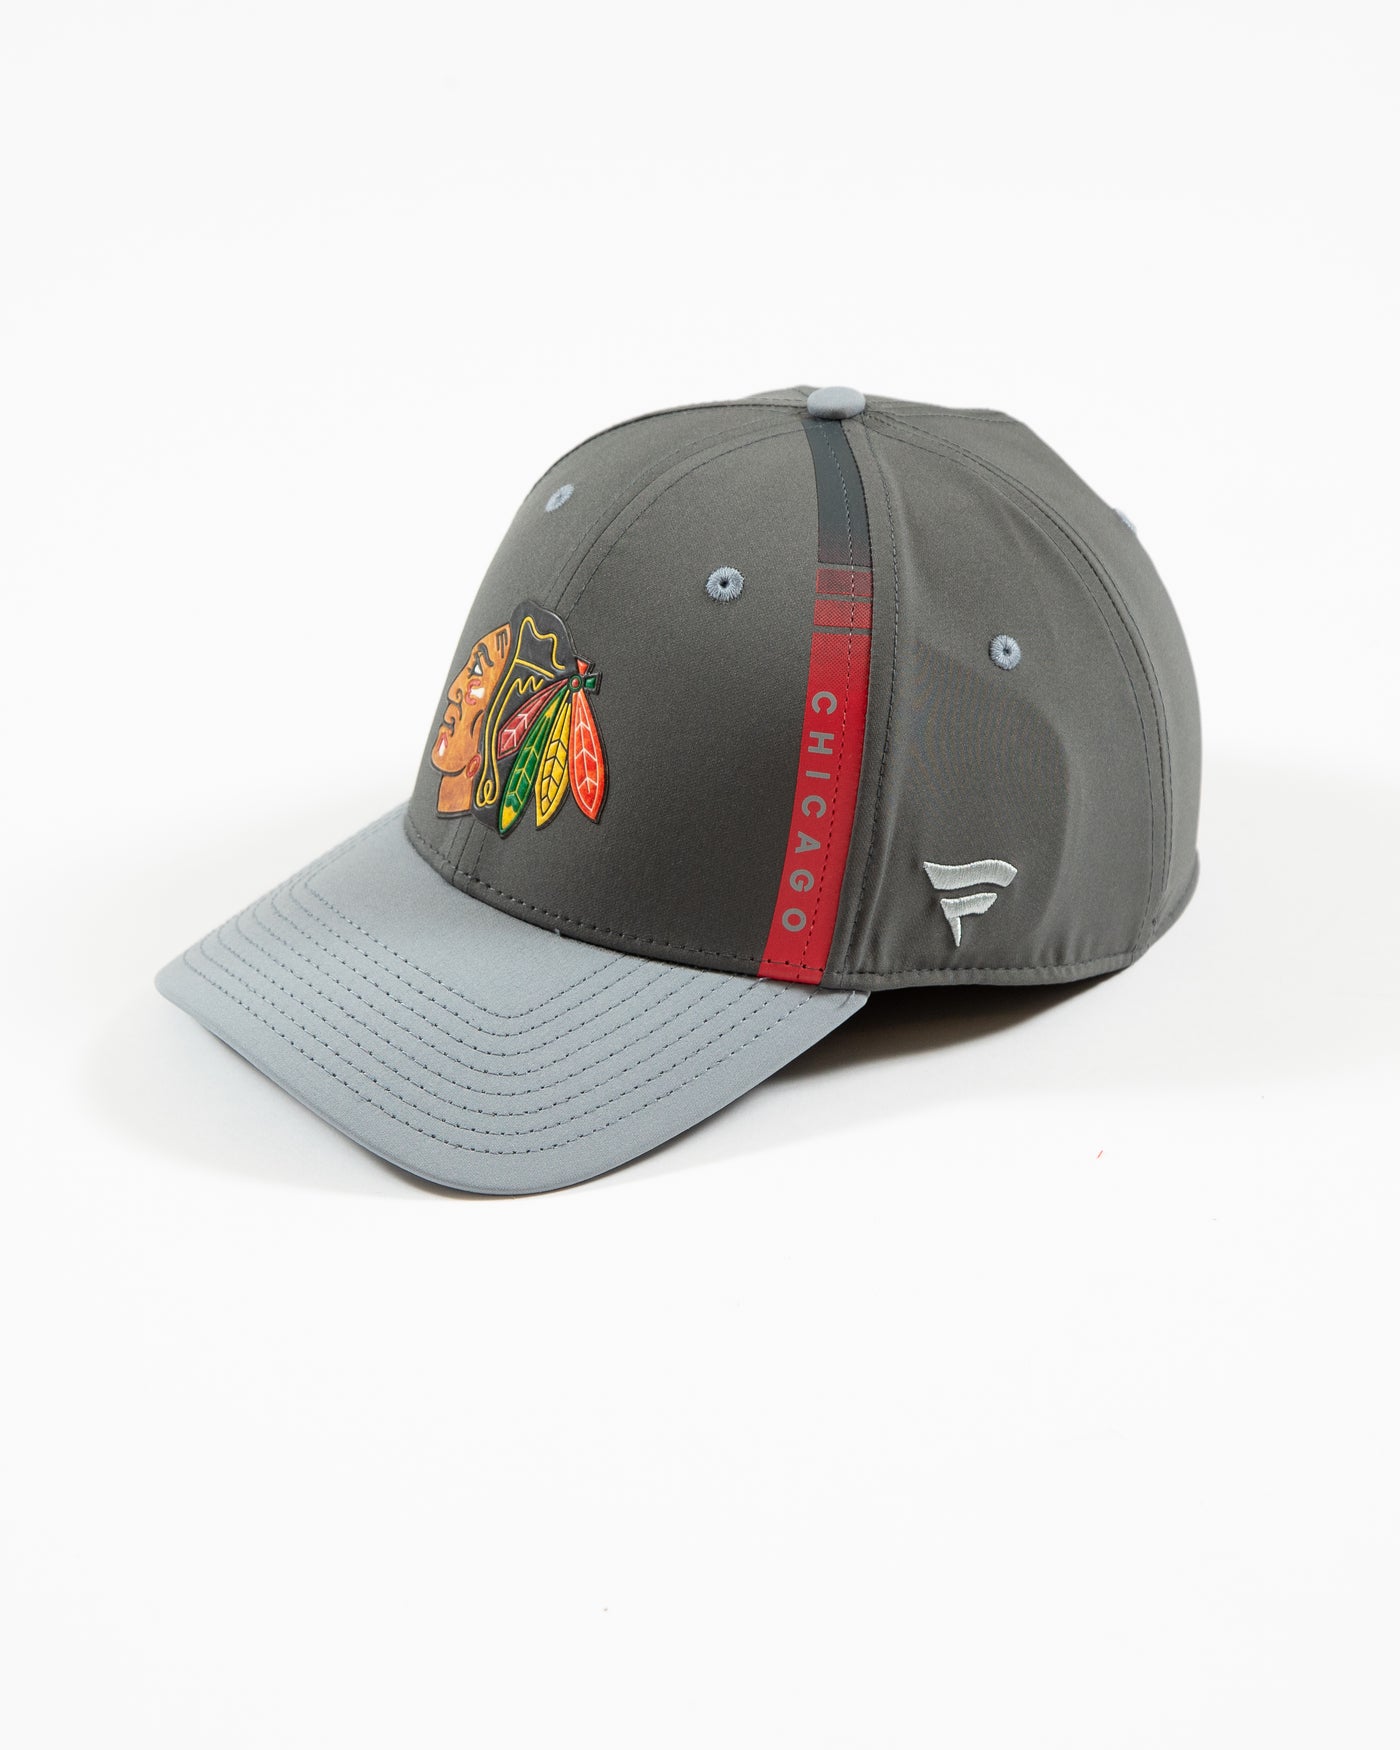 grey Fanatics fitted cap with Chicago Blackhawks primary logo on front and Chicago decal on left side - left side angle